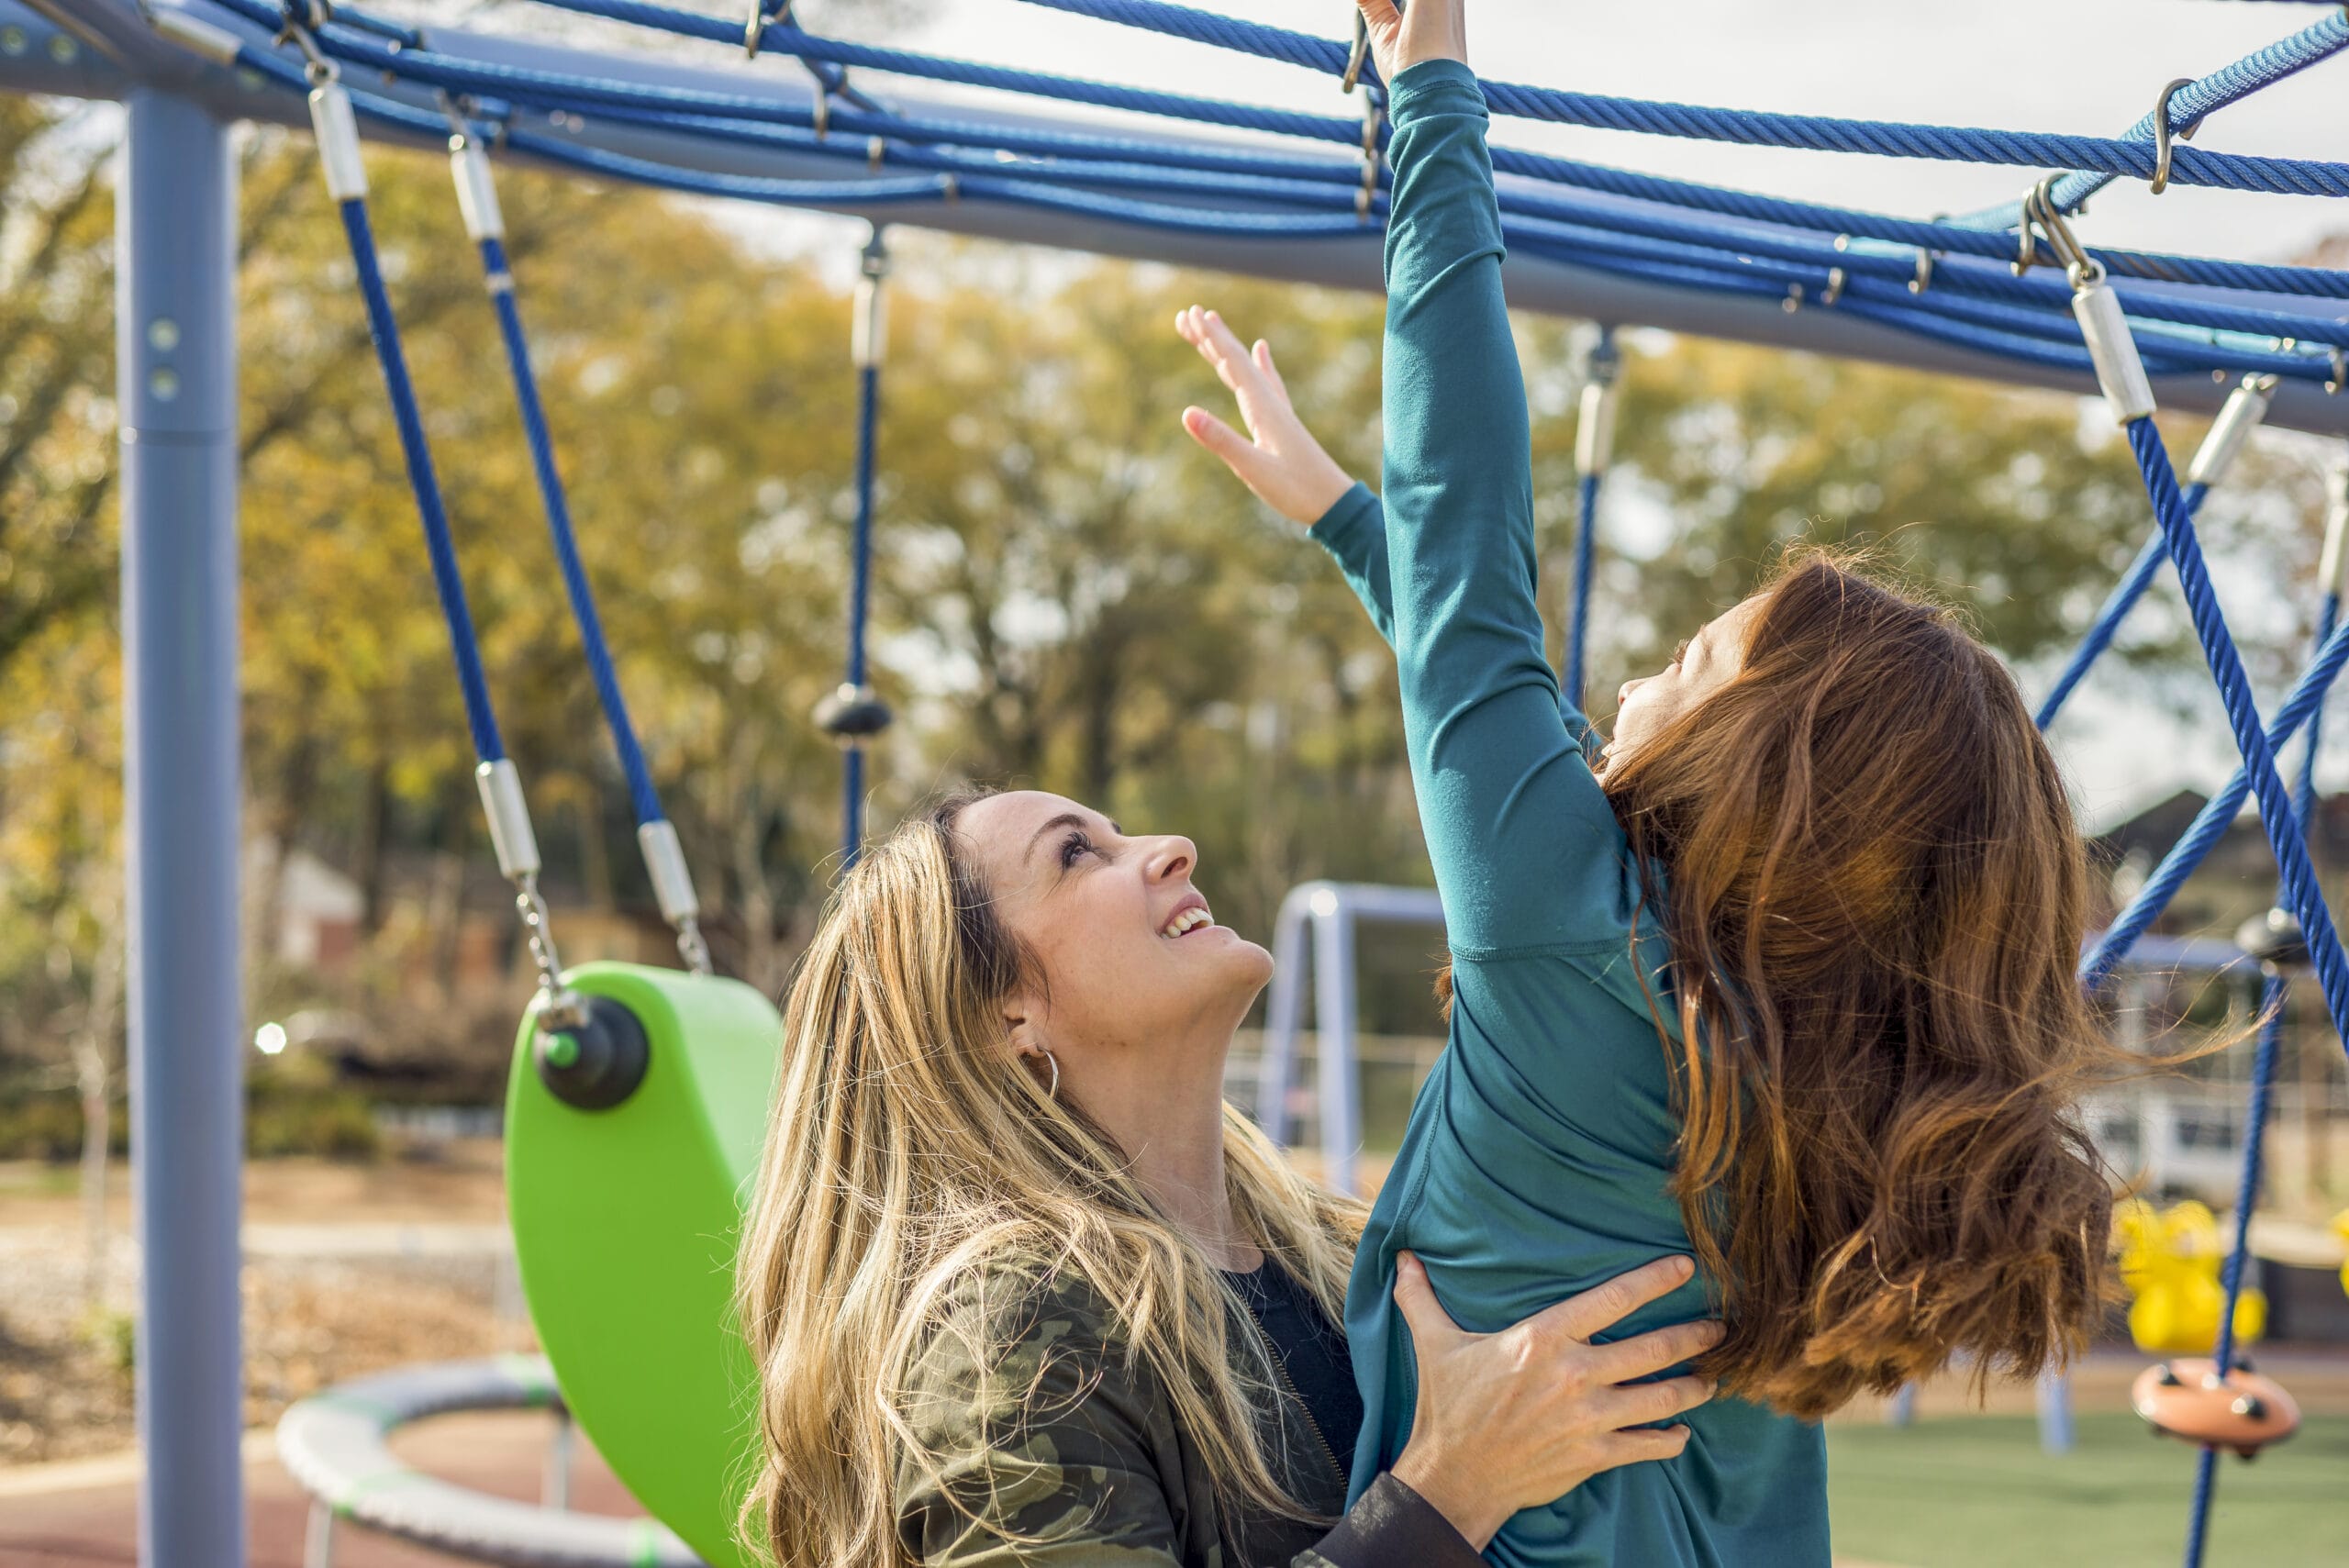 Two women playing on a playground.